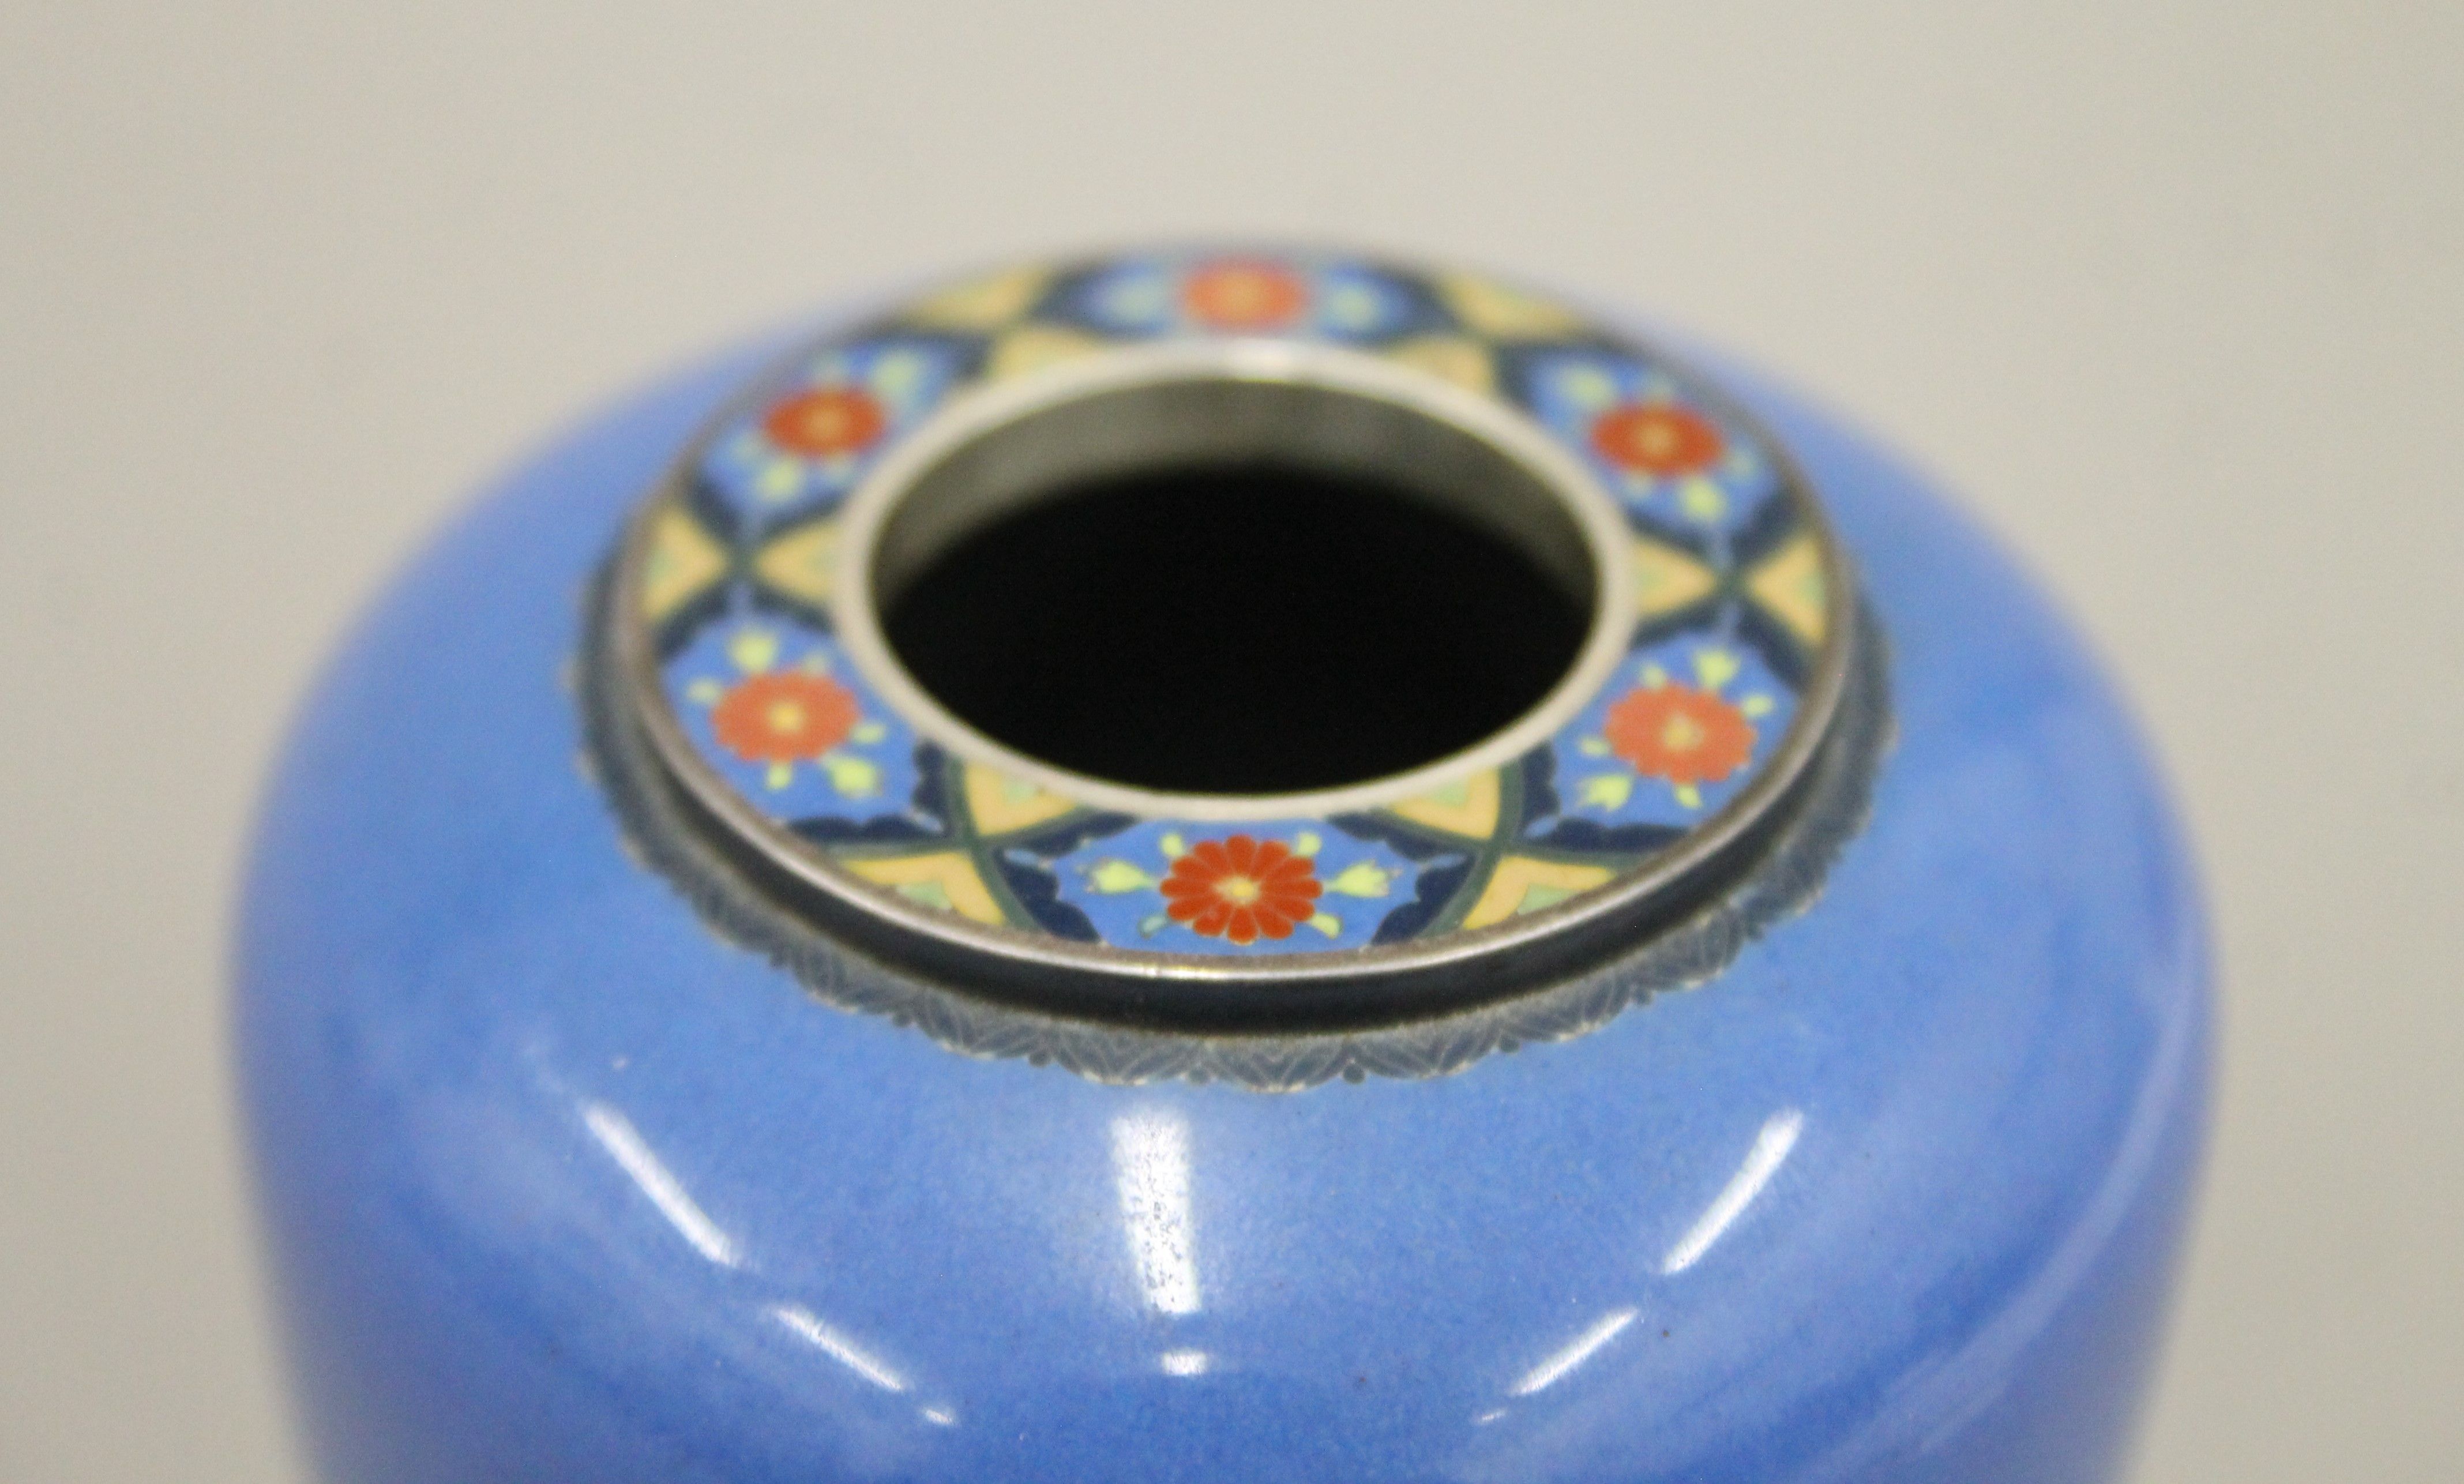 An early 20th century Japanese silver and cloisonne enamel lidded vase decorated with shoreline - Image 5 of 6